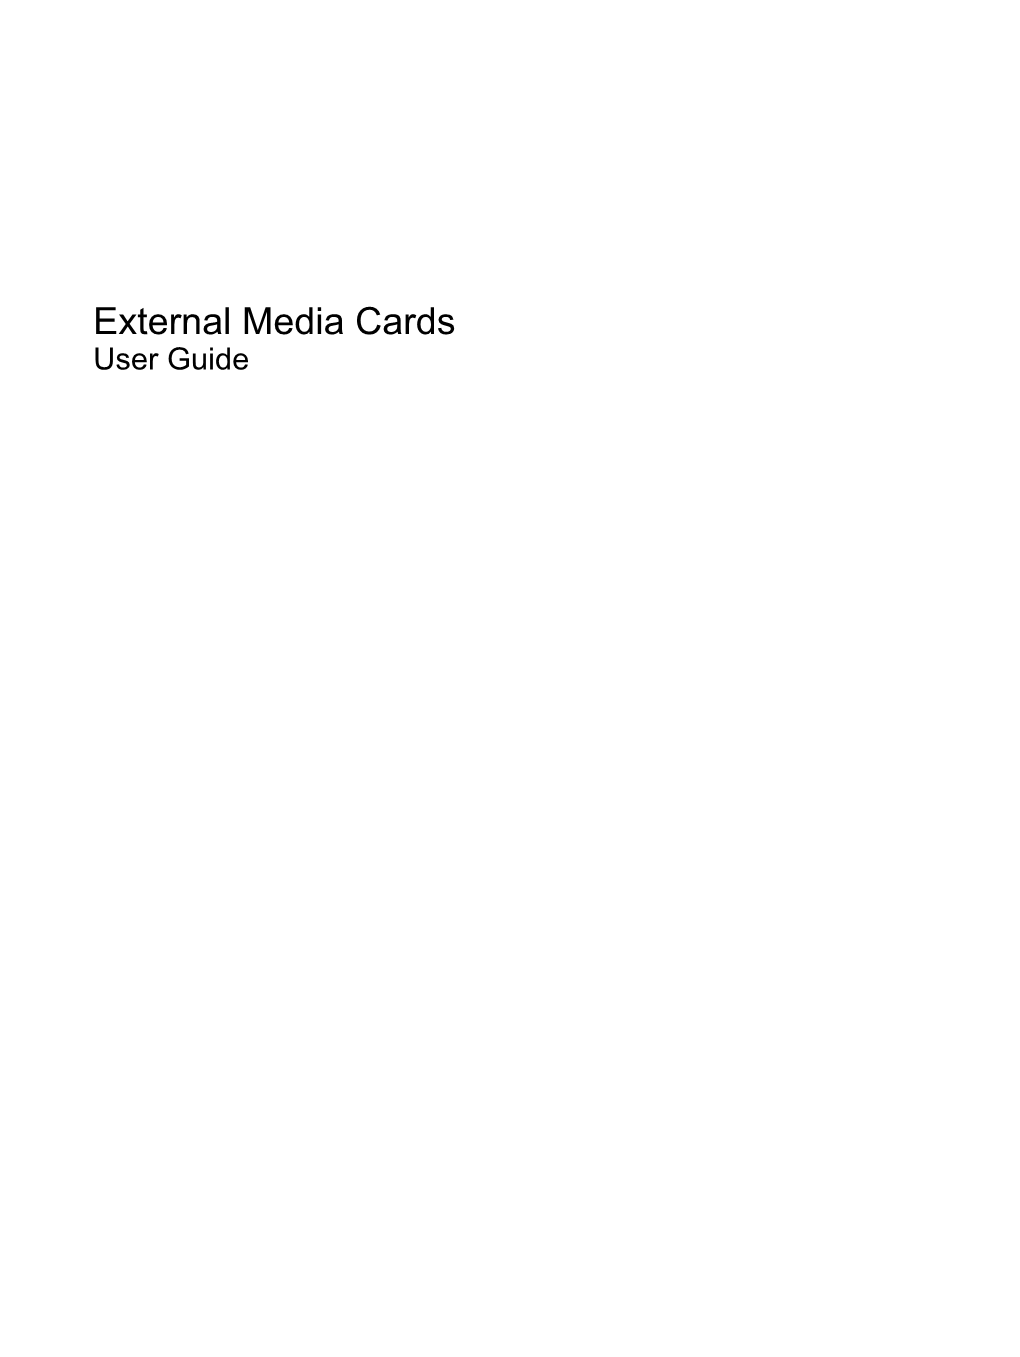 External Media Cards User Guide © Copyright 2008 Hewlett-Packard Product Notice Development Company, L.P